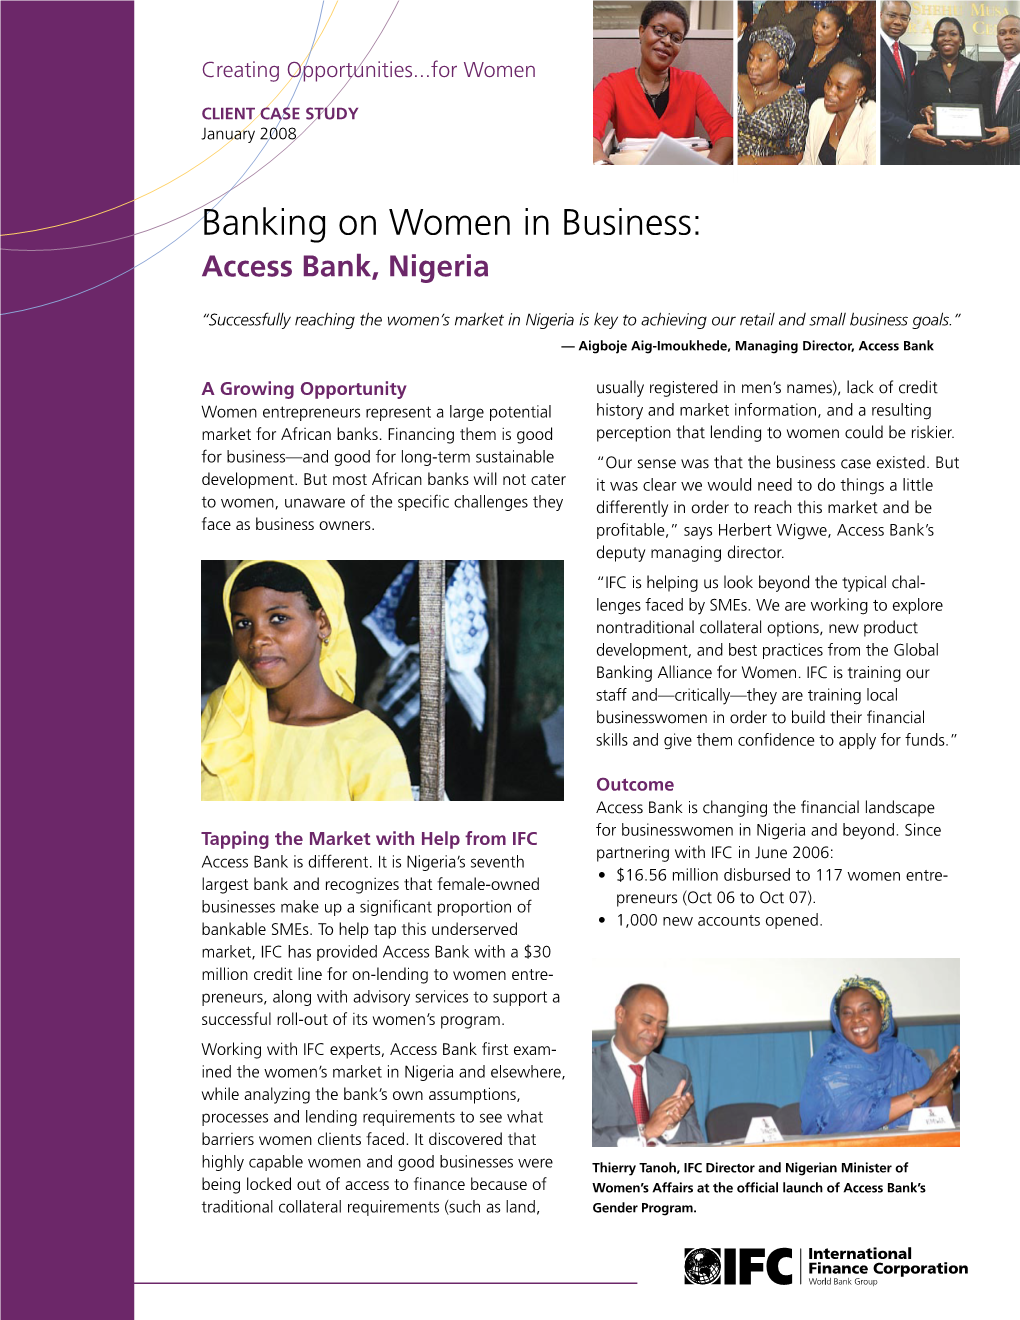 Banking on Women in Business: Access Bank, Nigeria